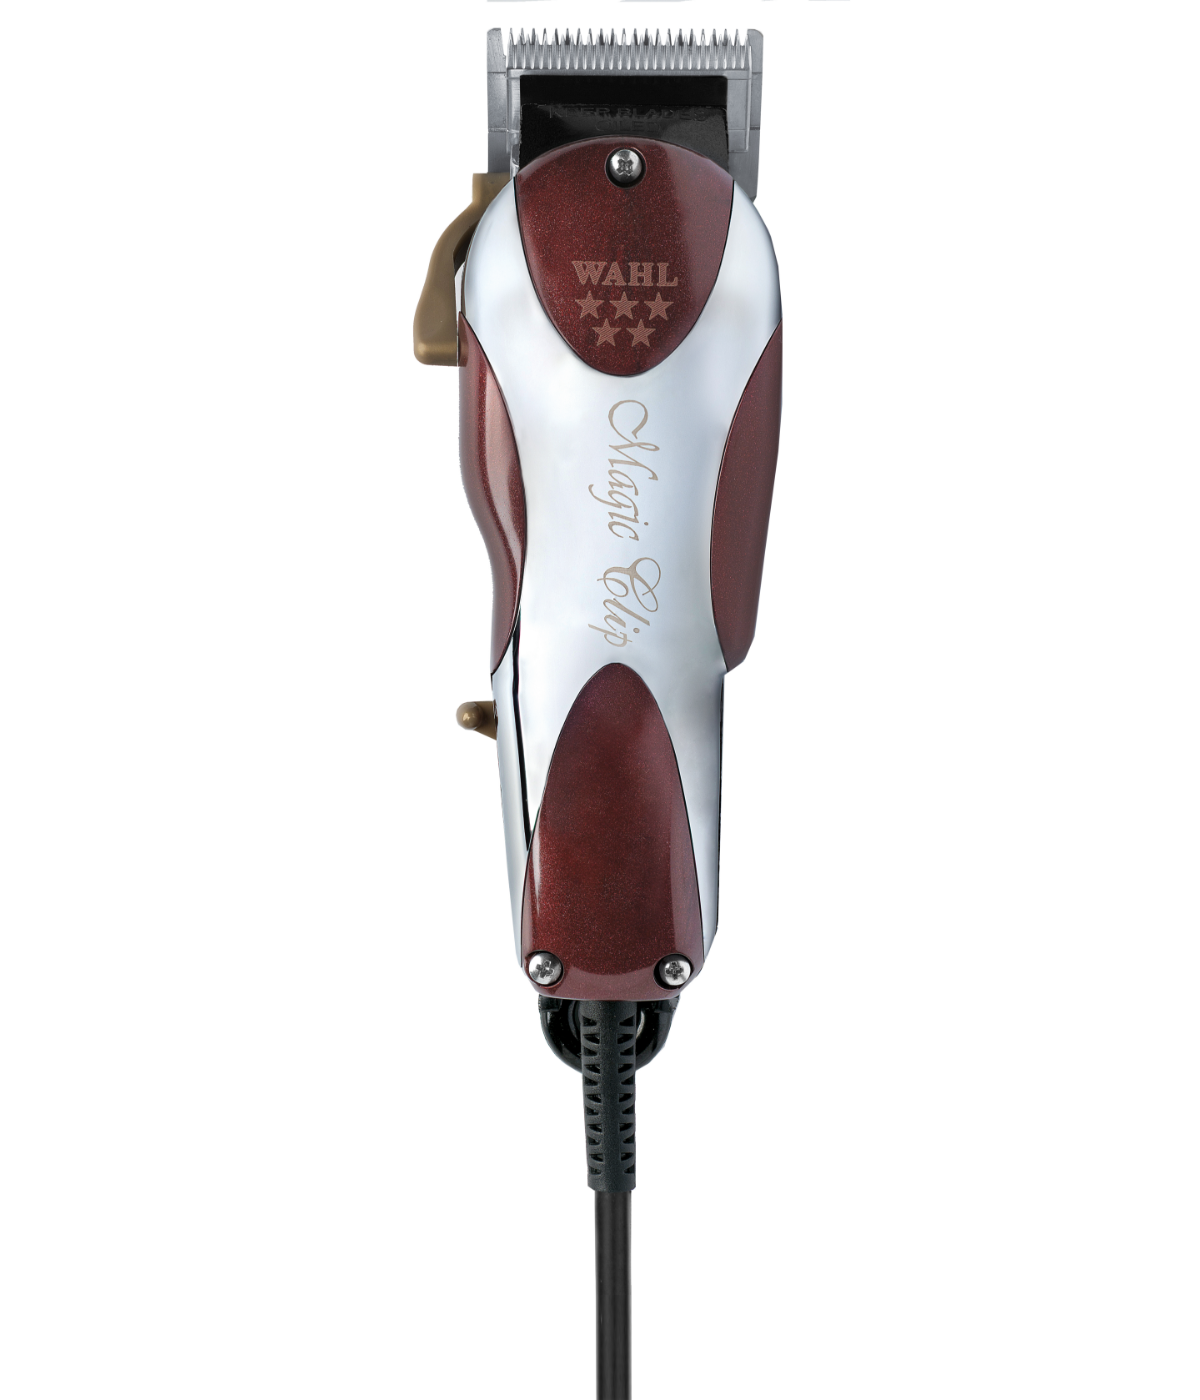 wahl 5 star magic clip review